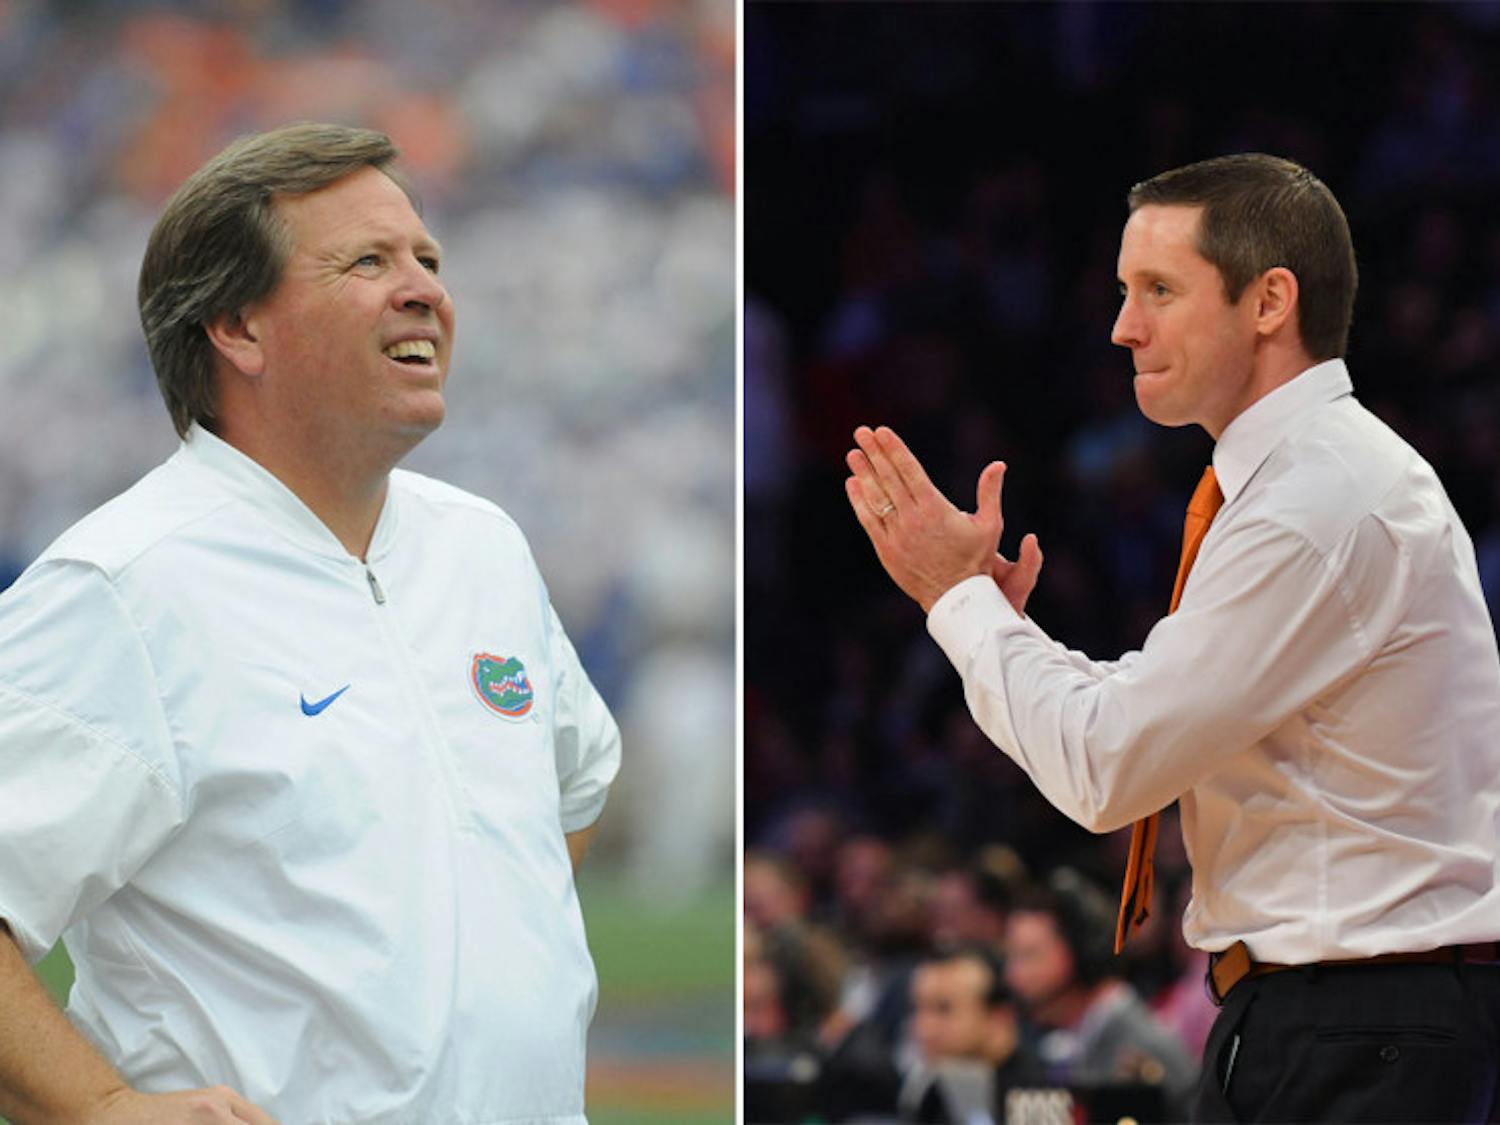 Jim McElwain (left) and Mike White received contract extensions and raises on Friday afternoon. McElwain's new deal runs through 2022, while White's runs through 2023.